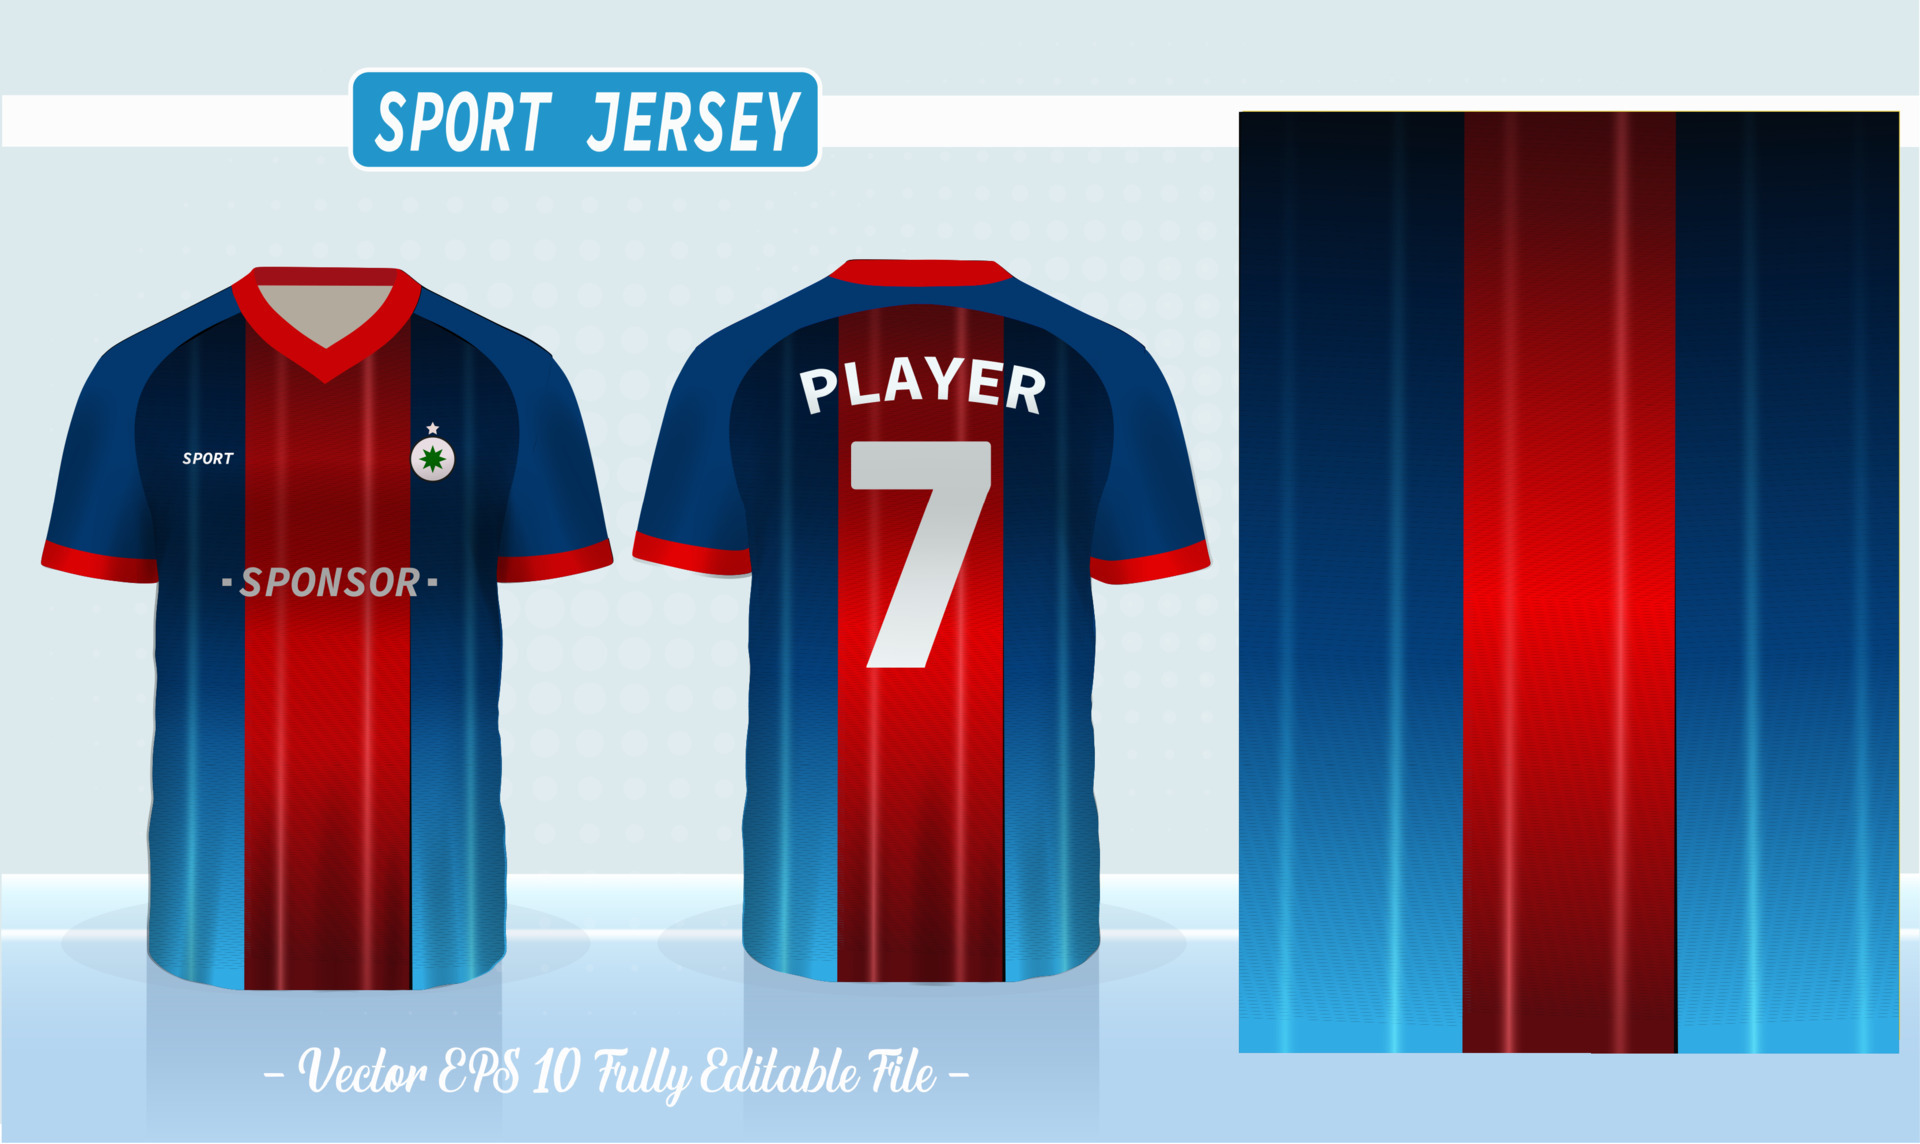 Soccer Jersey Or Football Kit Template For Football Club Blue And